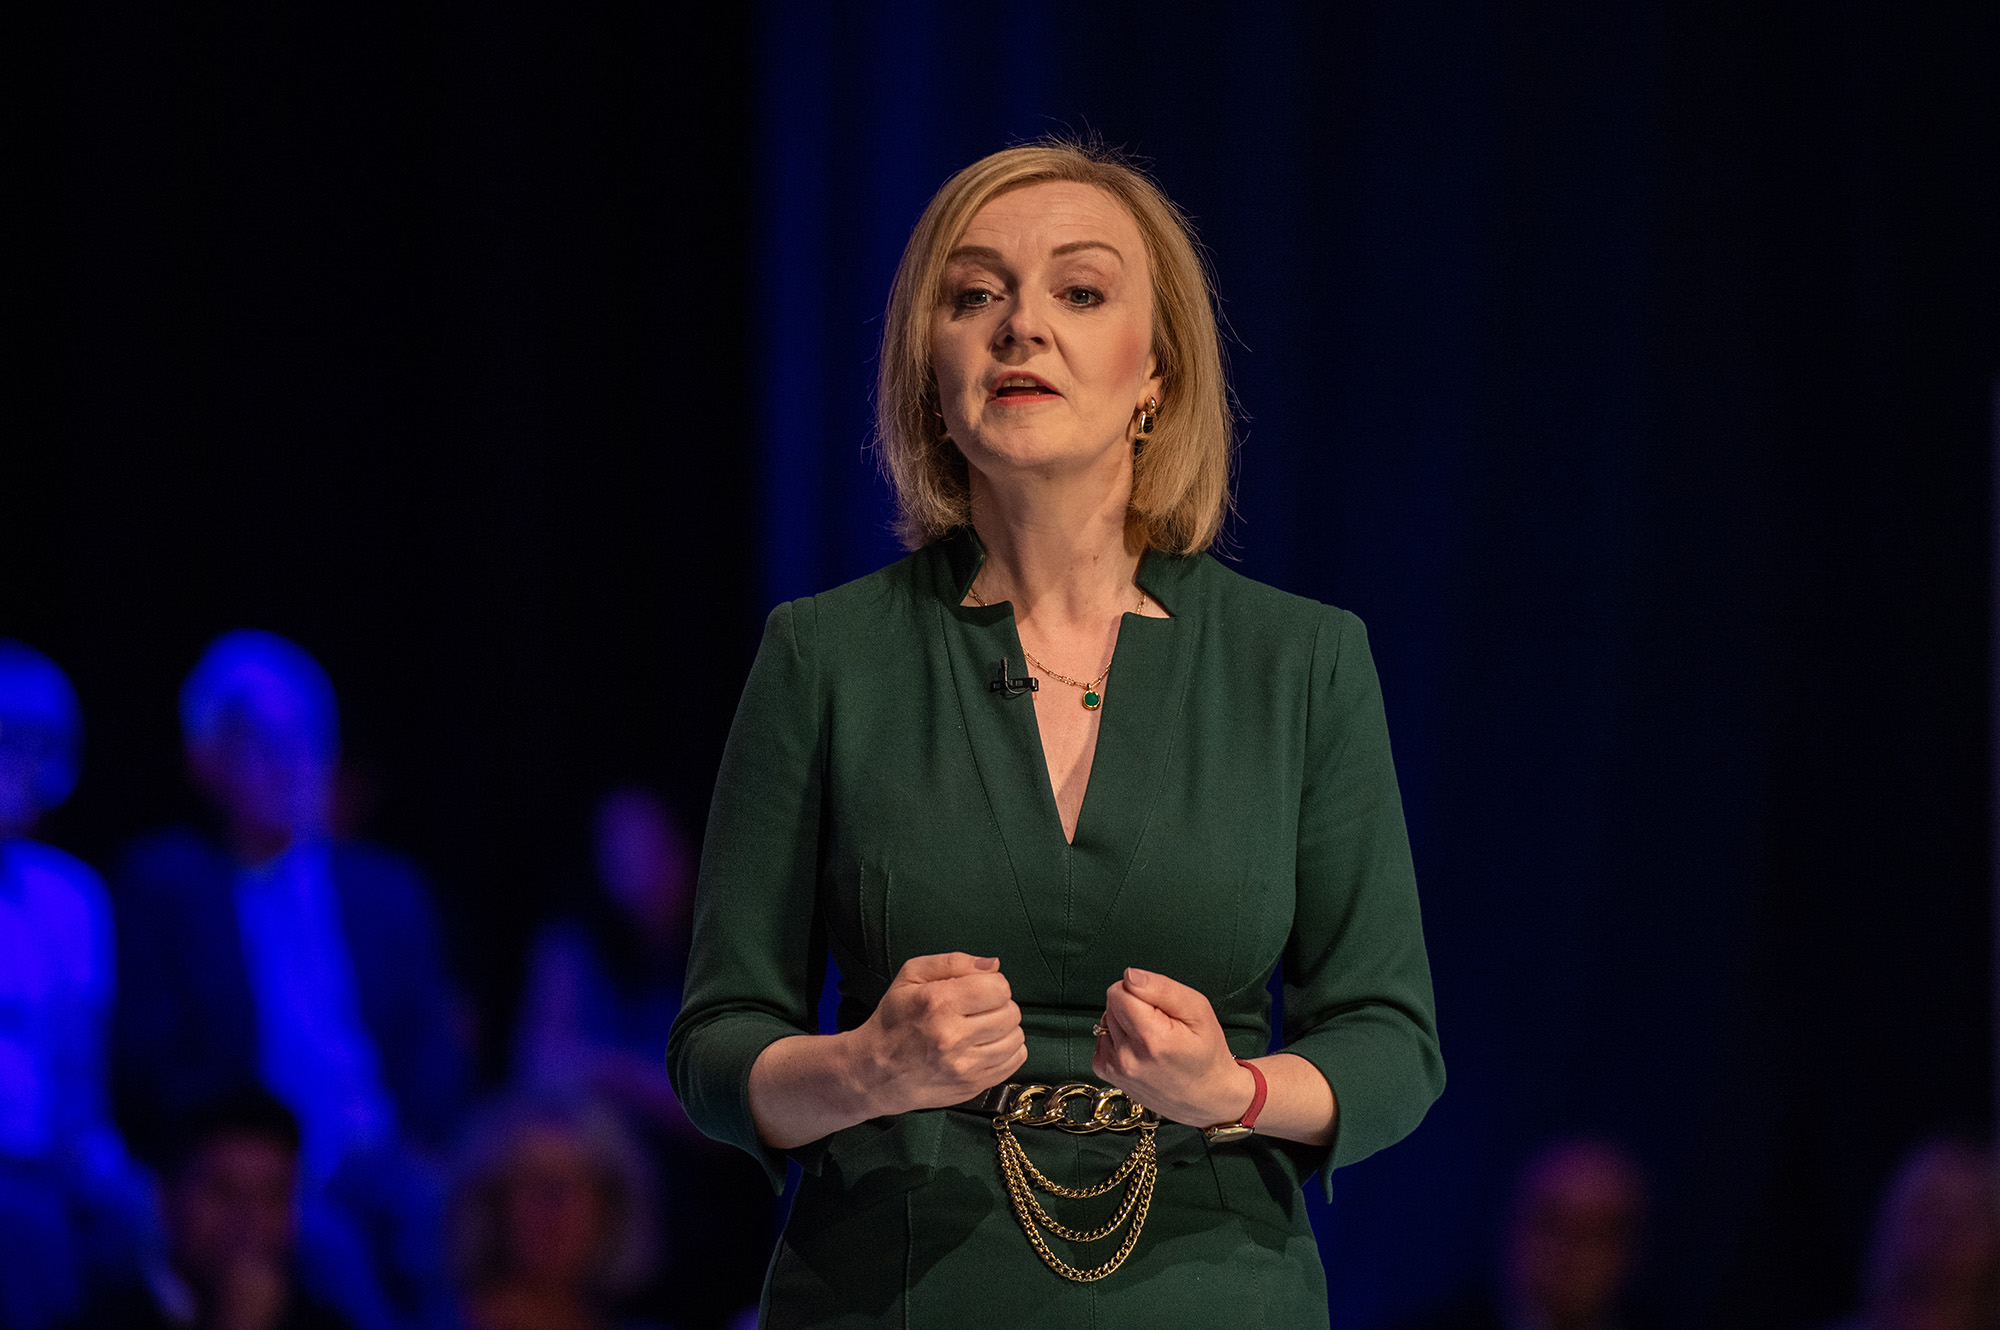 Liz Truss during the Conservative Party leadership hustings in Eastbourne, UK.